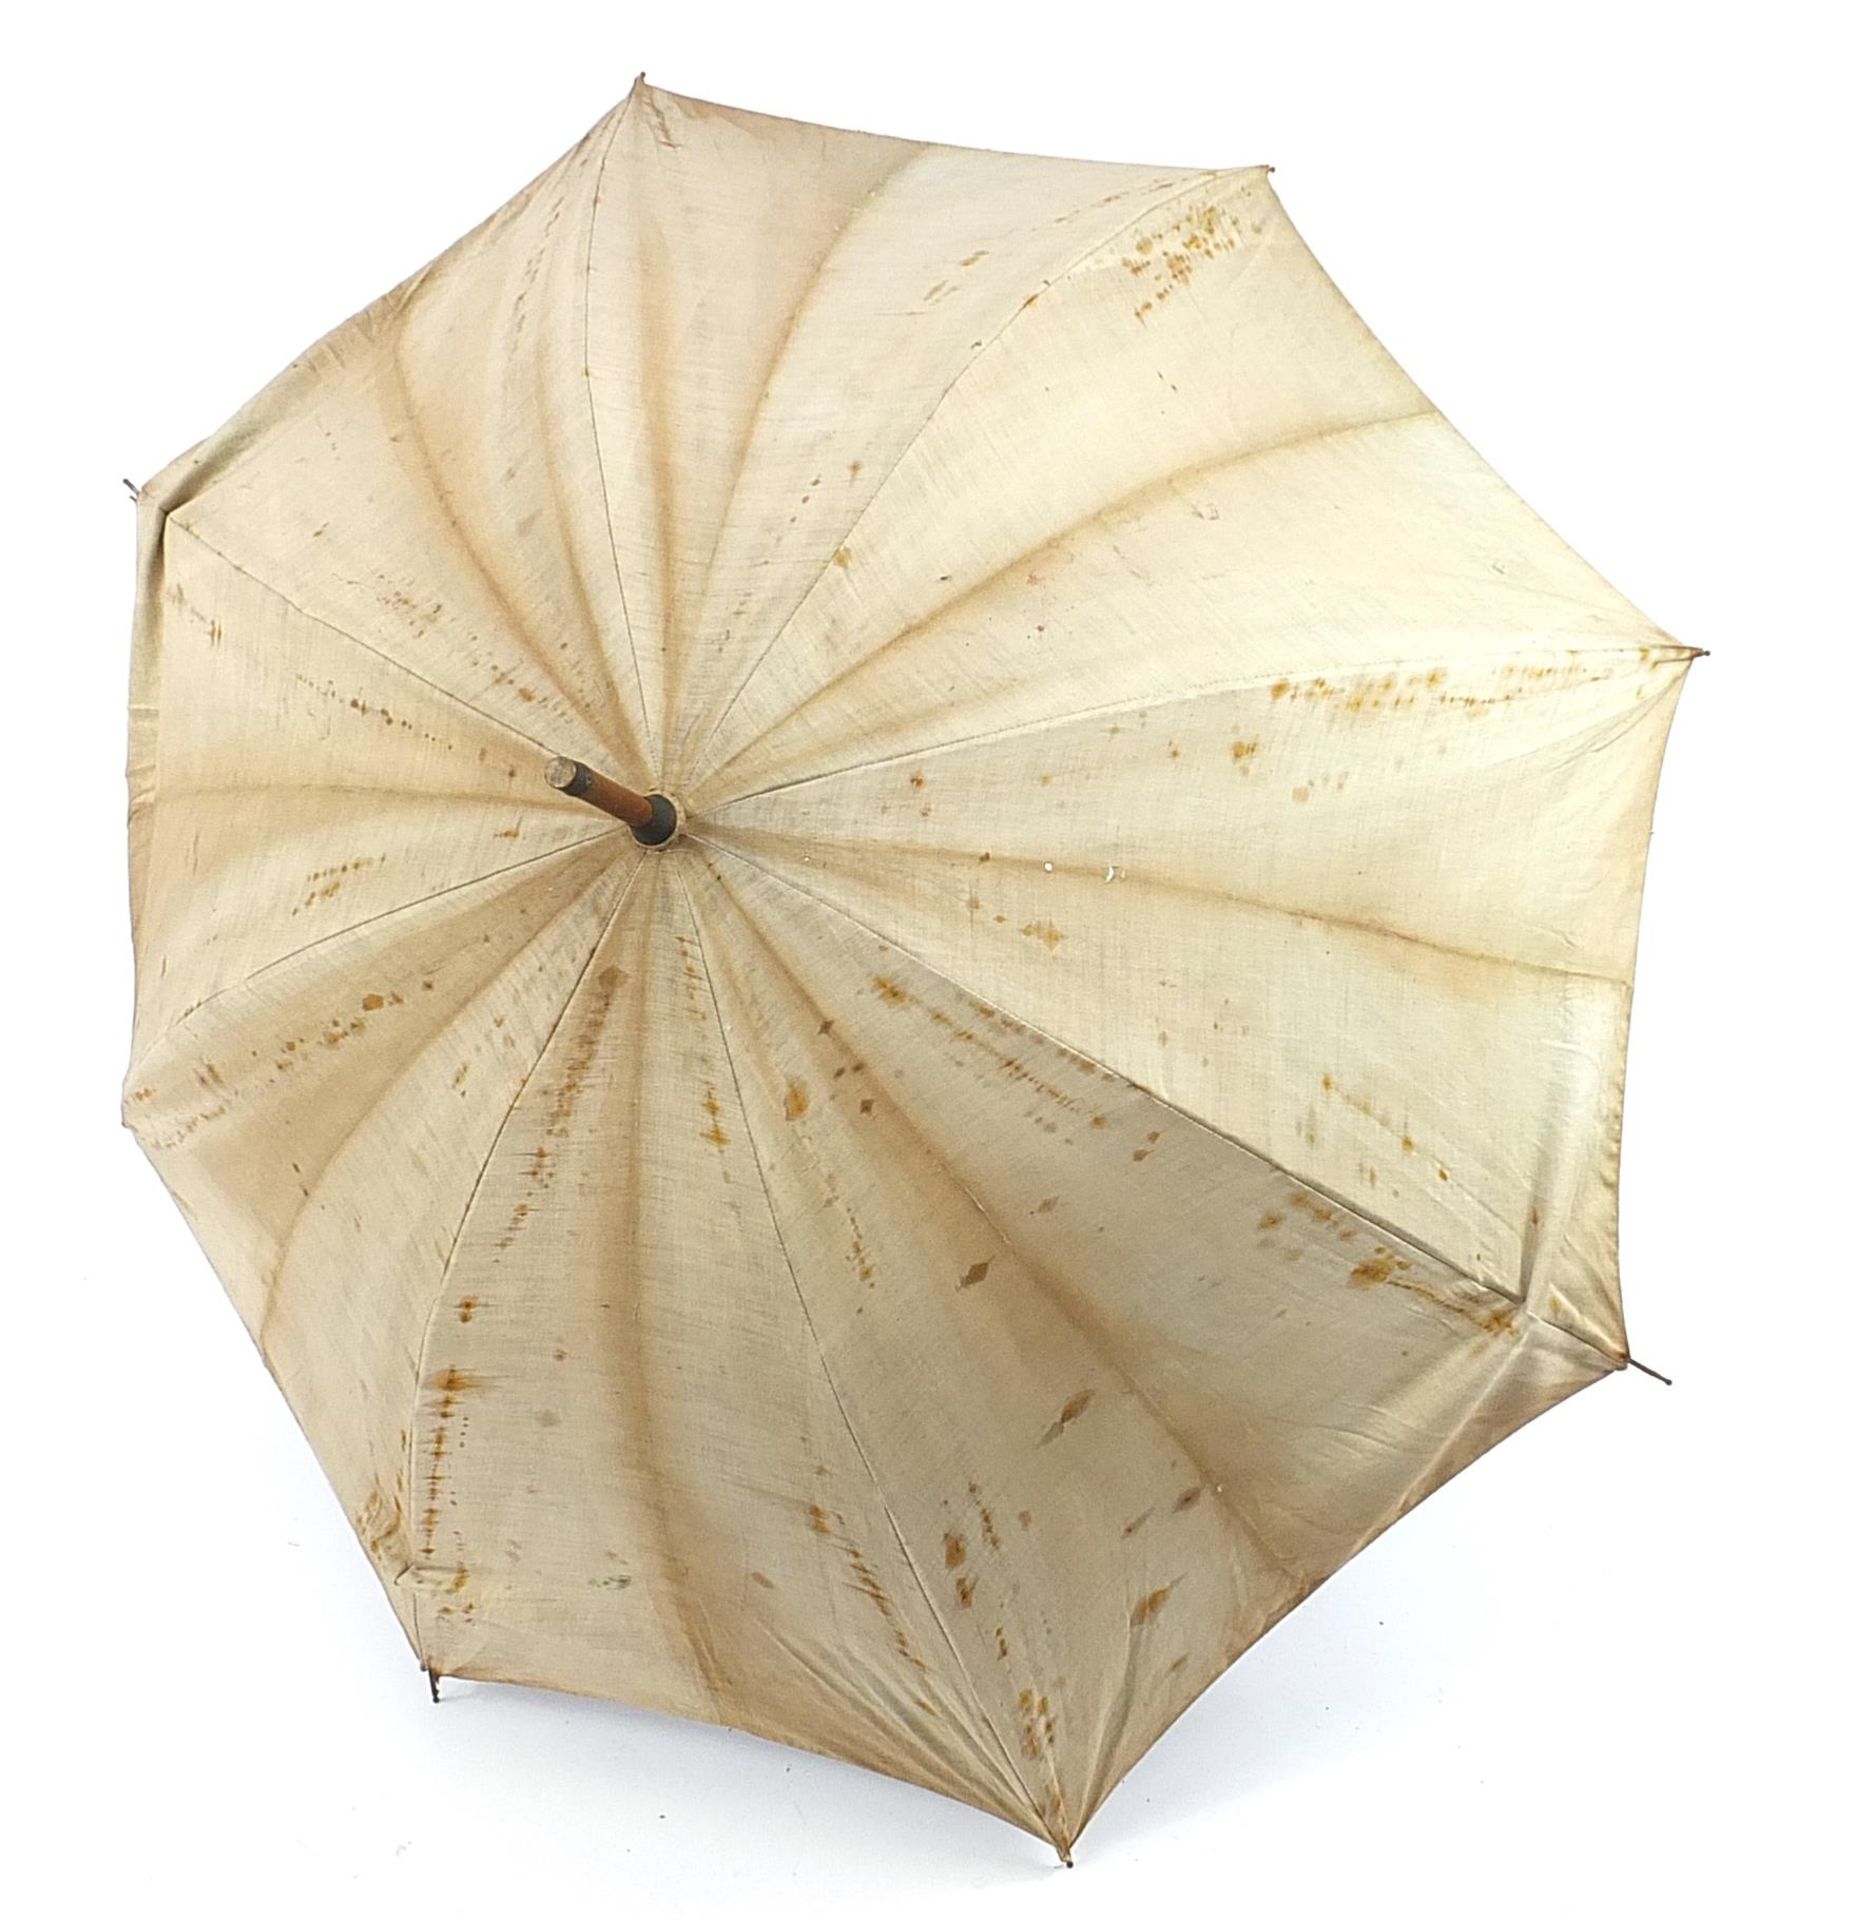 Black forest parasol with carved bamboo design handle, 87cm in length - Image 4 of 4